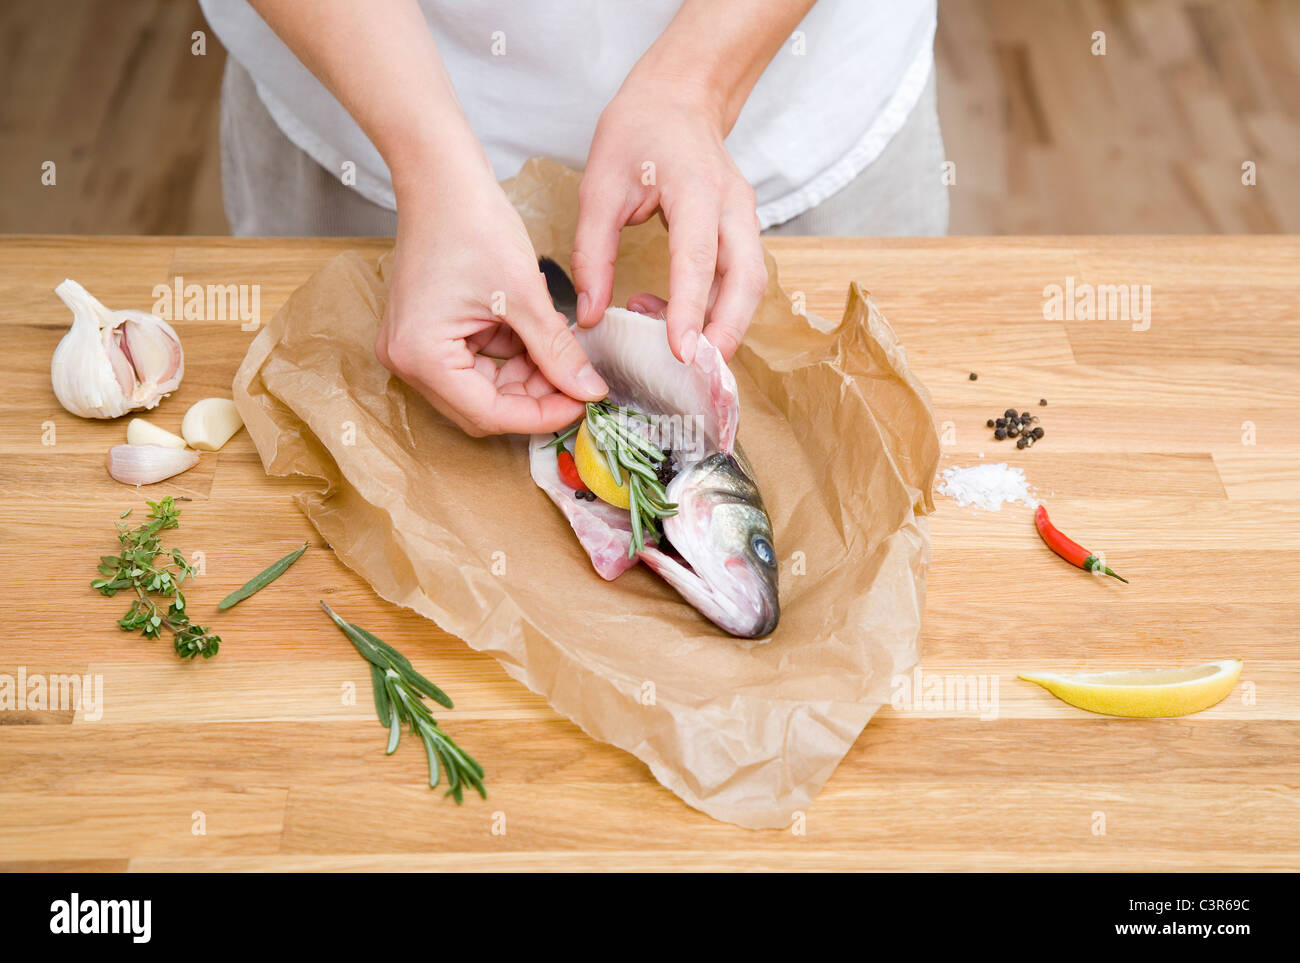 Preparing fish with herbs, spices, lemon Stock Photo